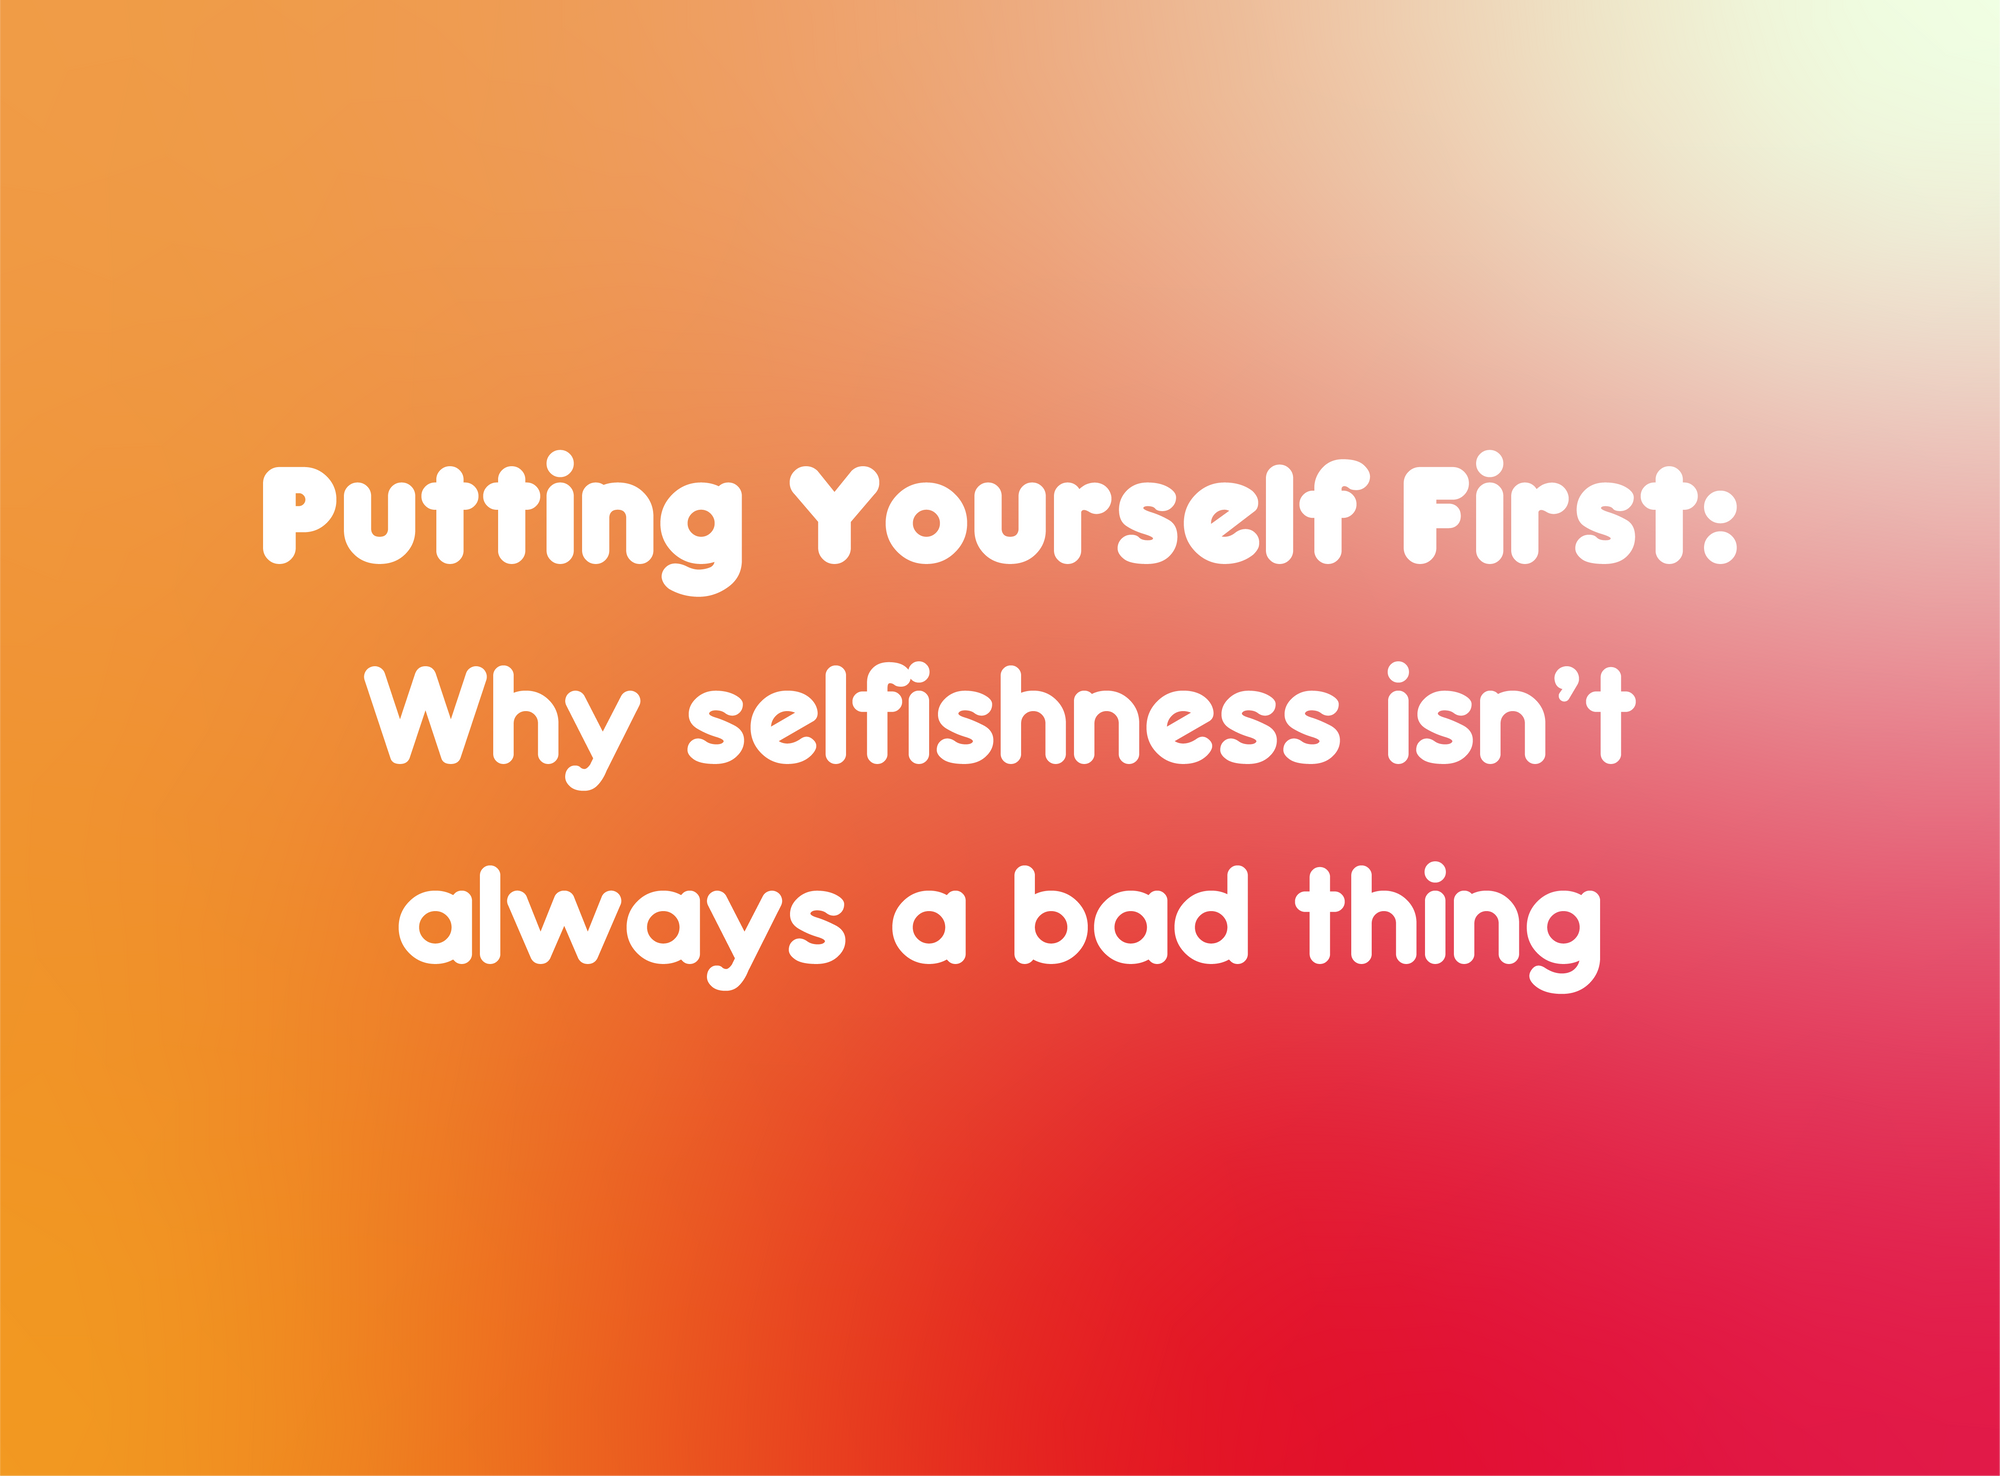 Putting Yourself First: Why Selfishness isn't always a bad thing.